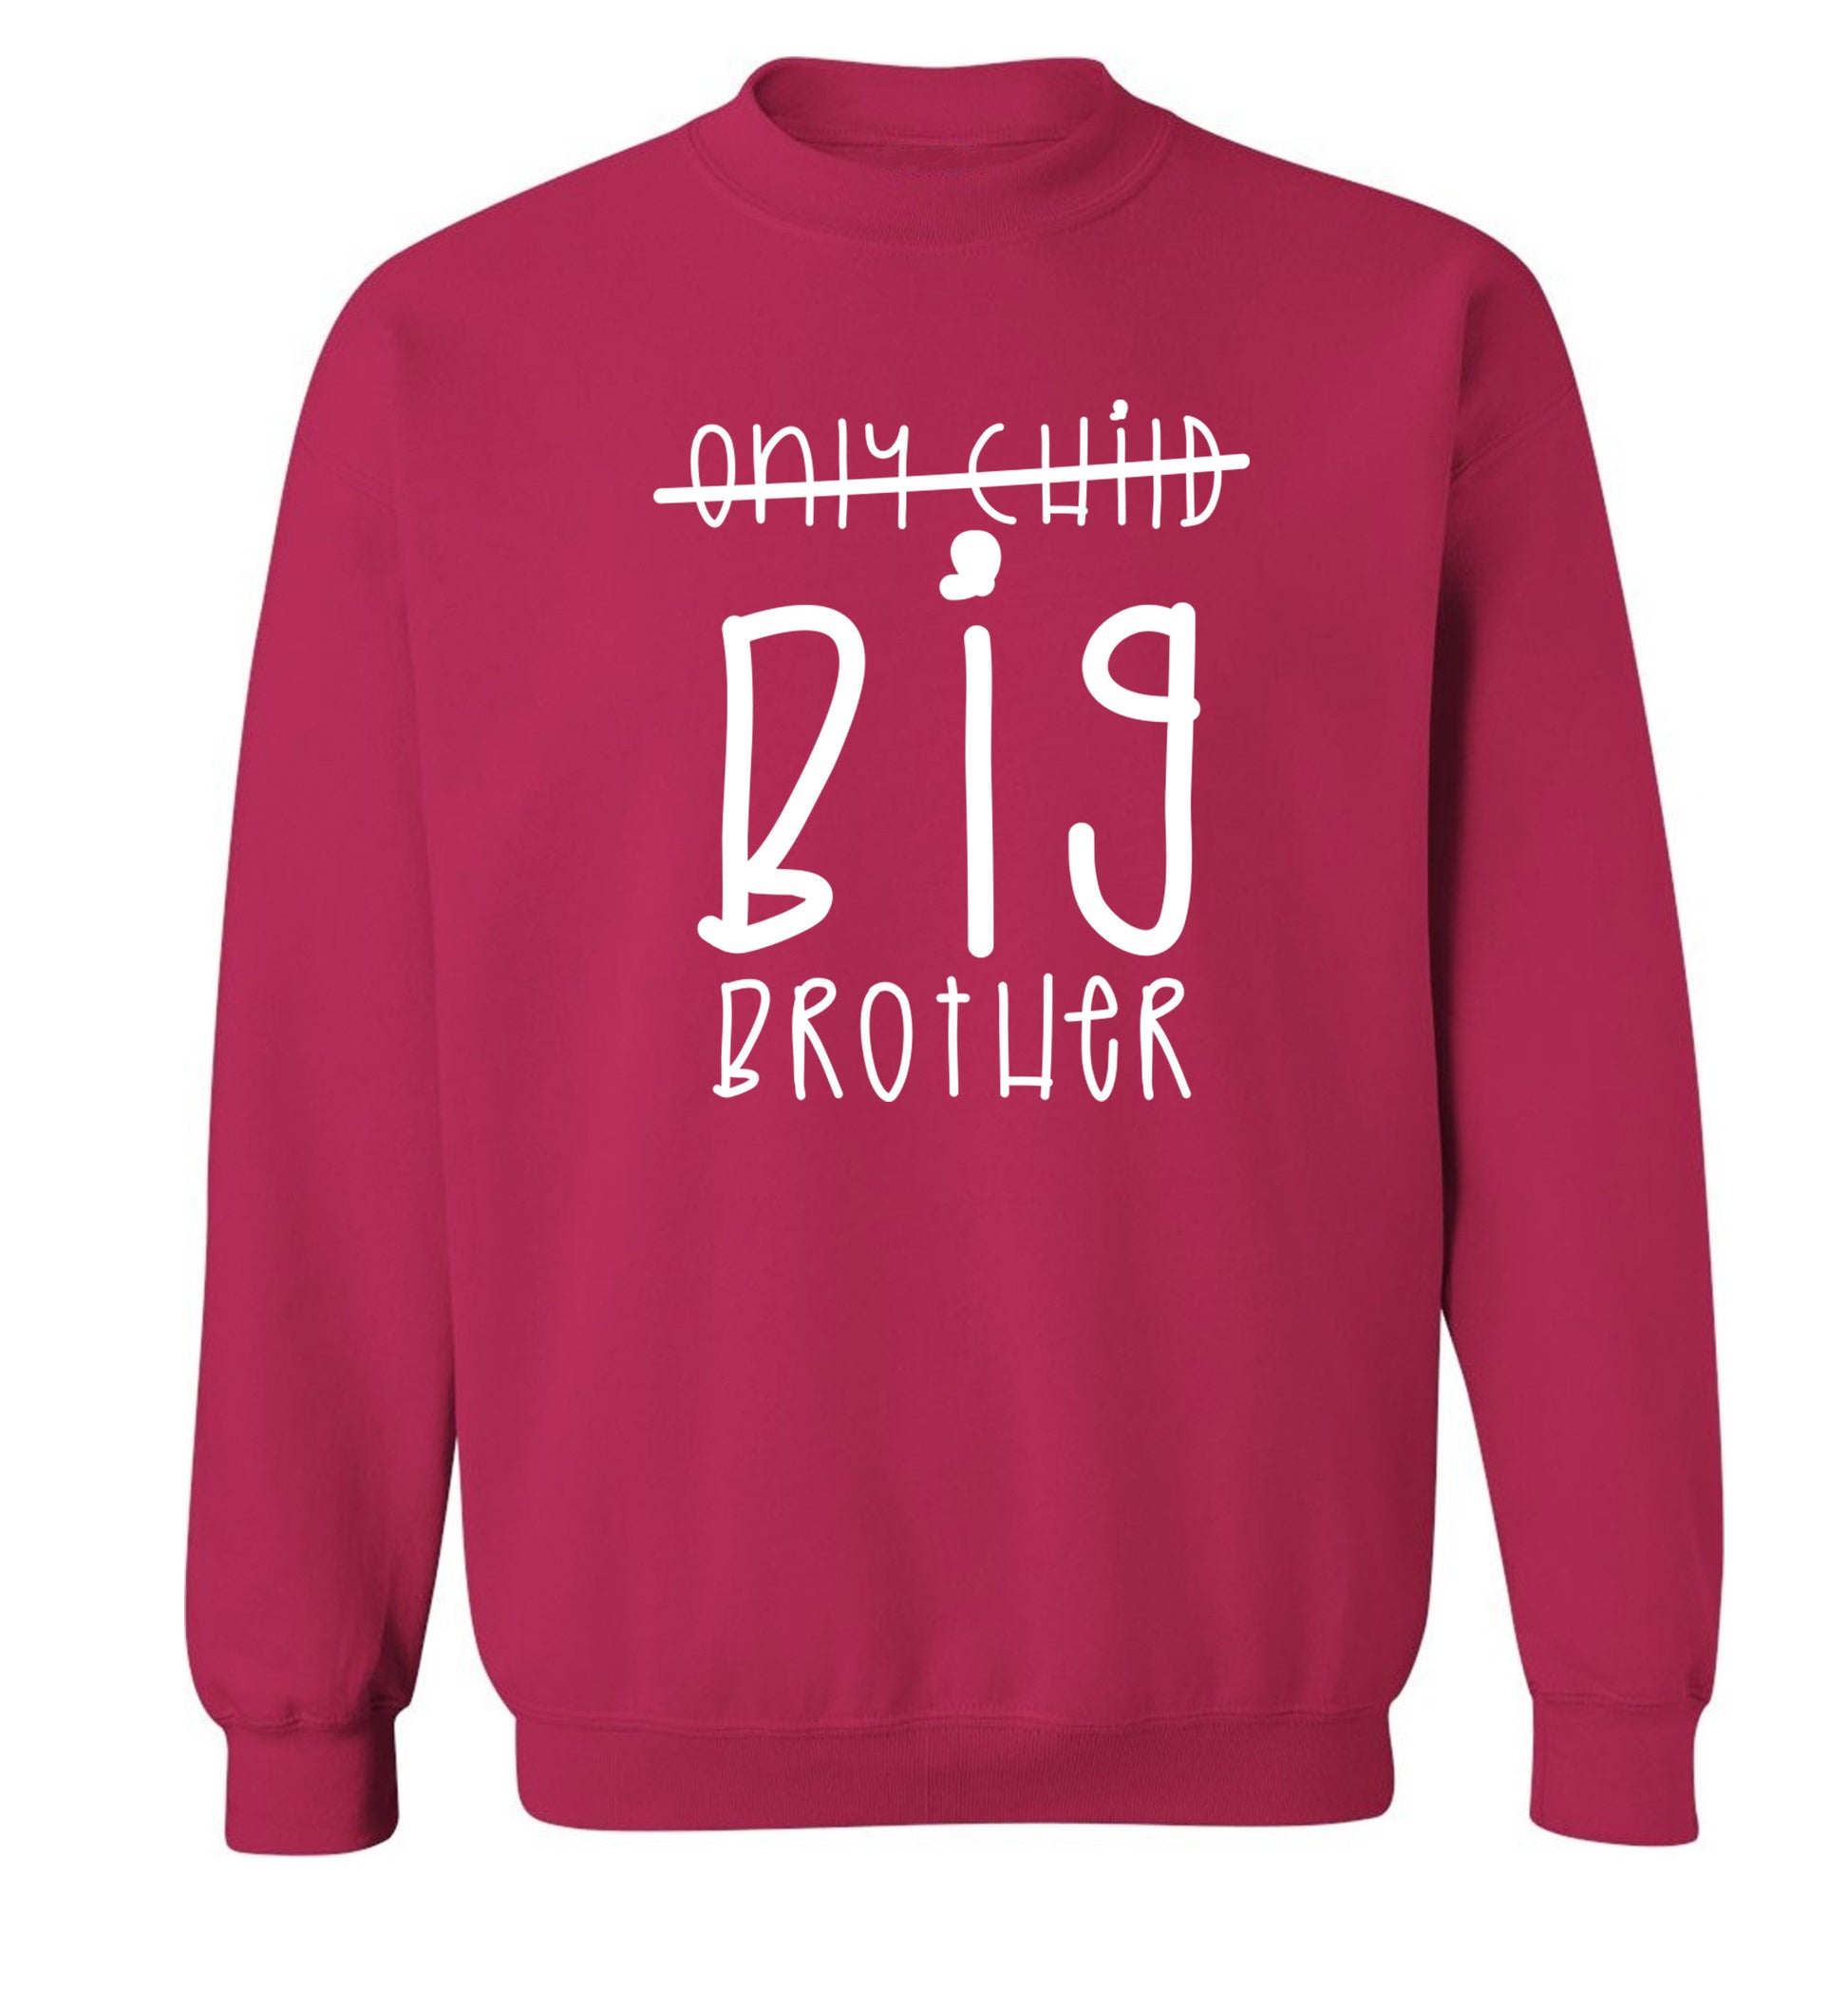 Only child big brother Adult's unisex pink Sweater 2XL